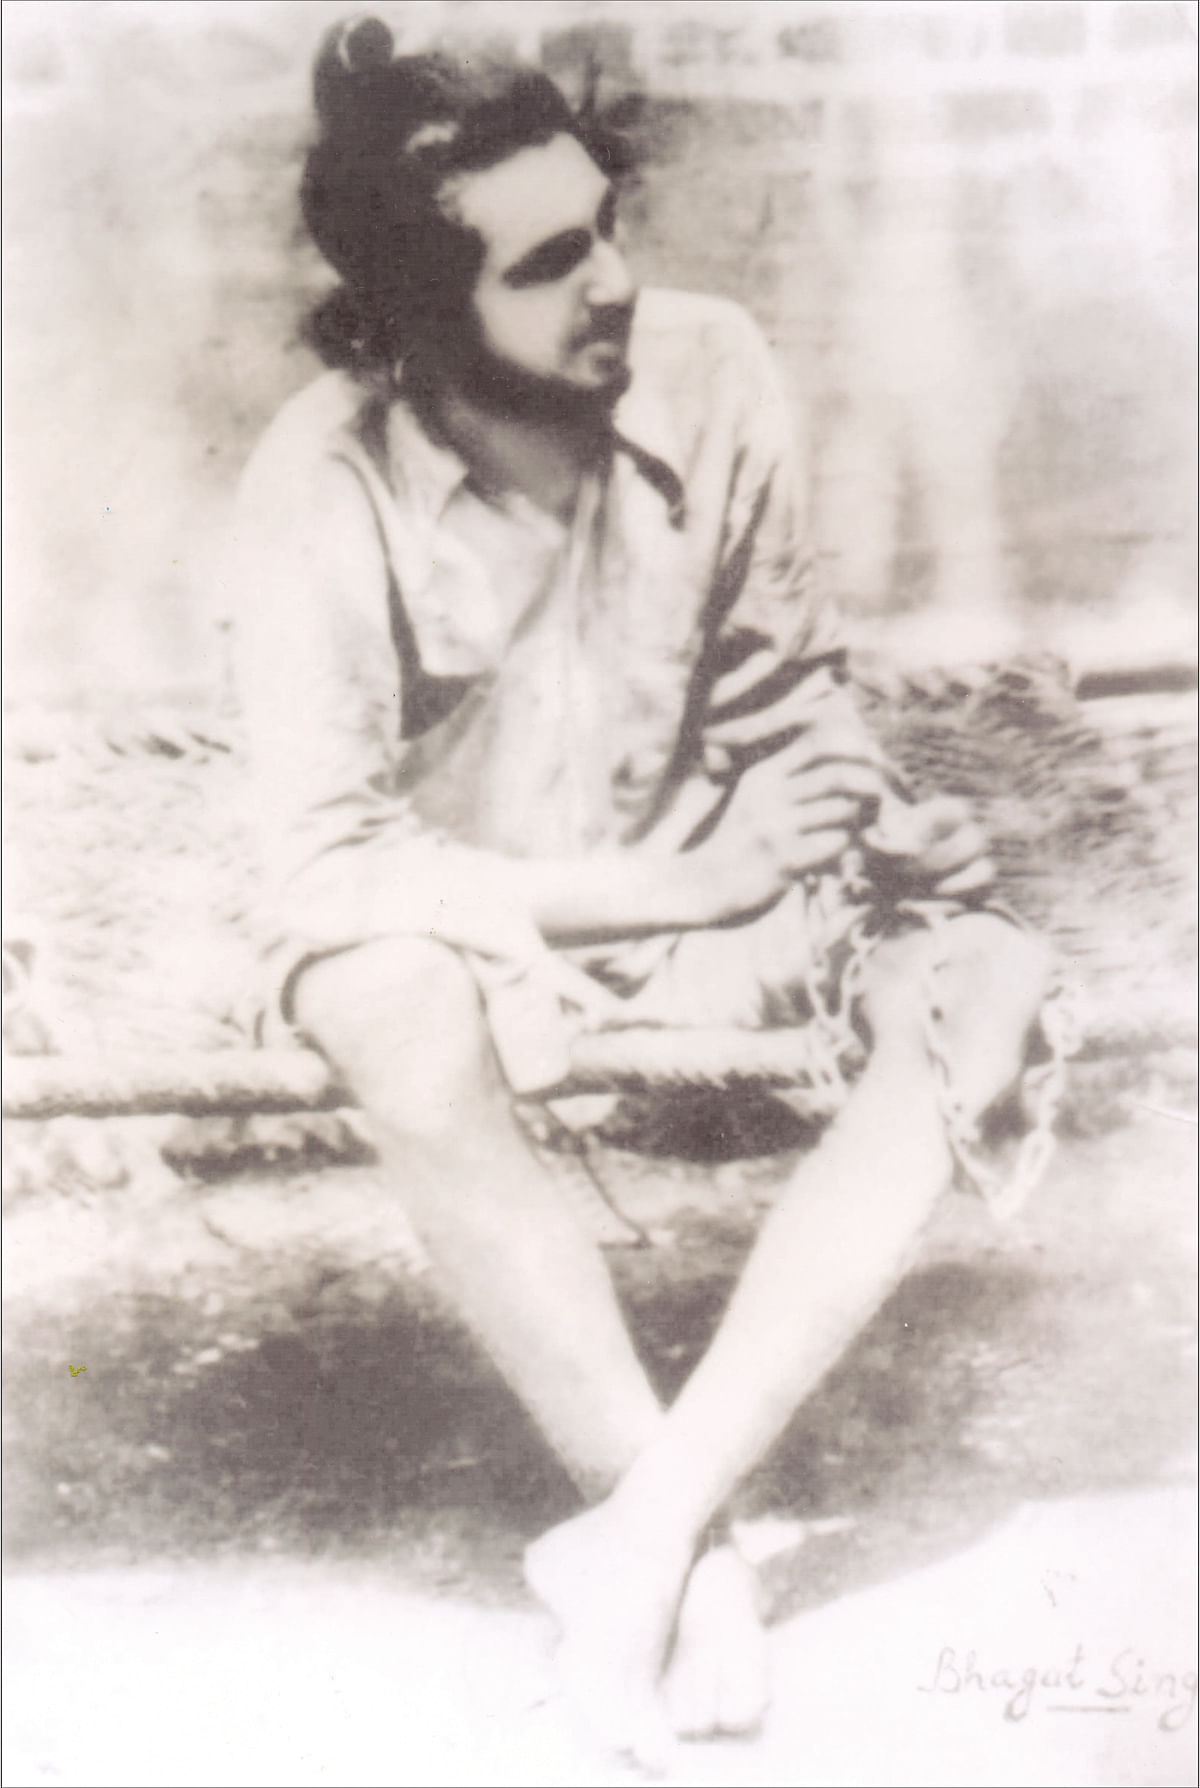 “When you deny a person their basic rights, how can you demand political rights,” Bhagat Singh asks in a 1928 essay.